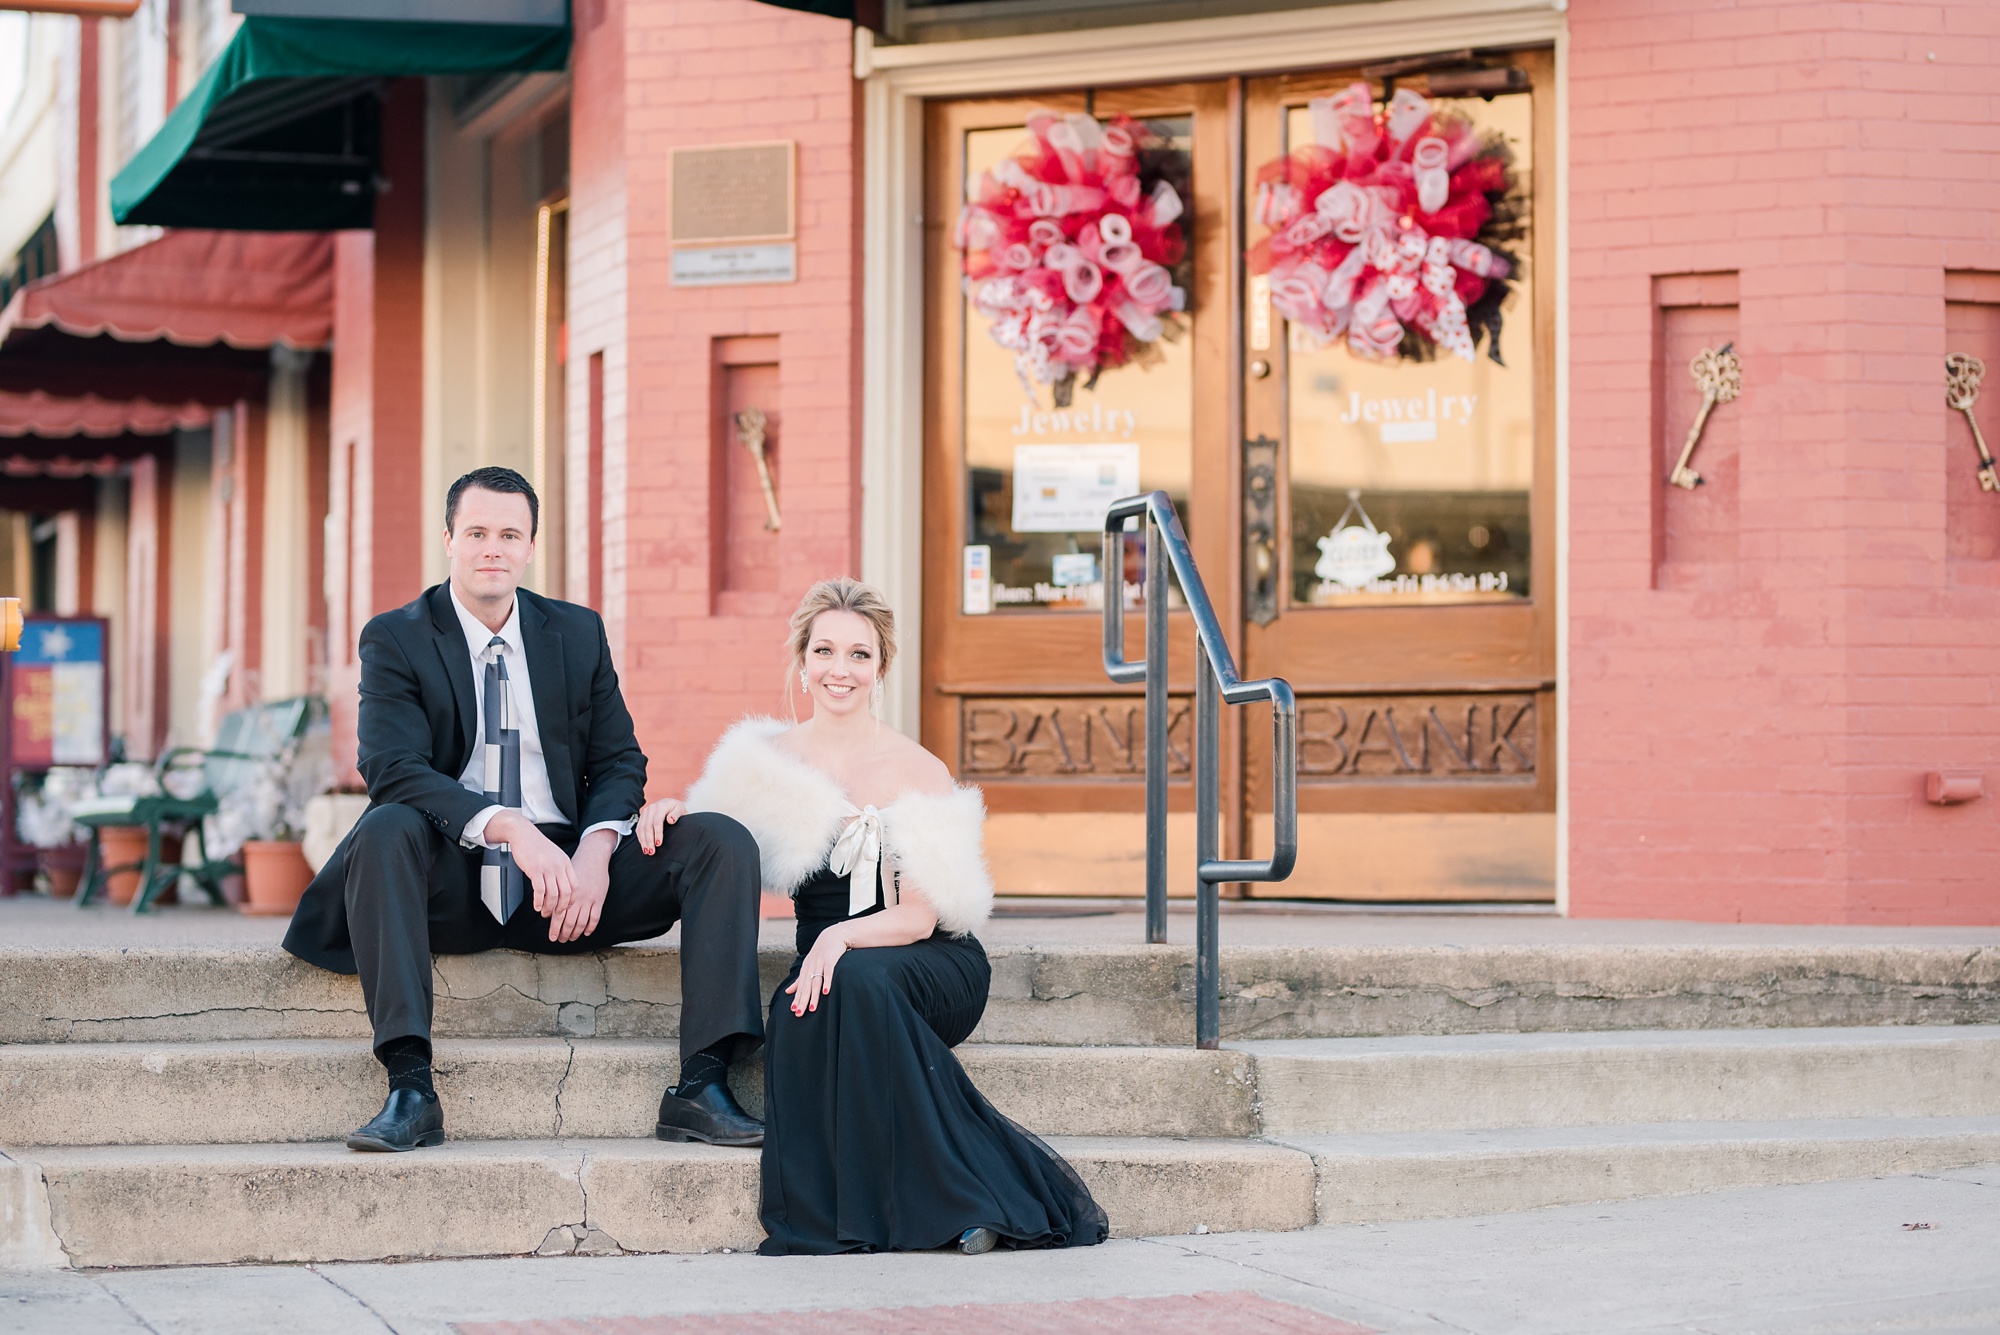 A Classy Downtown Grapevine Engagement Session